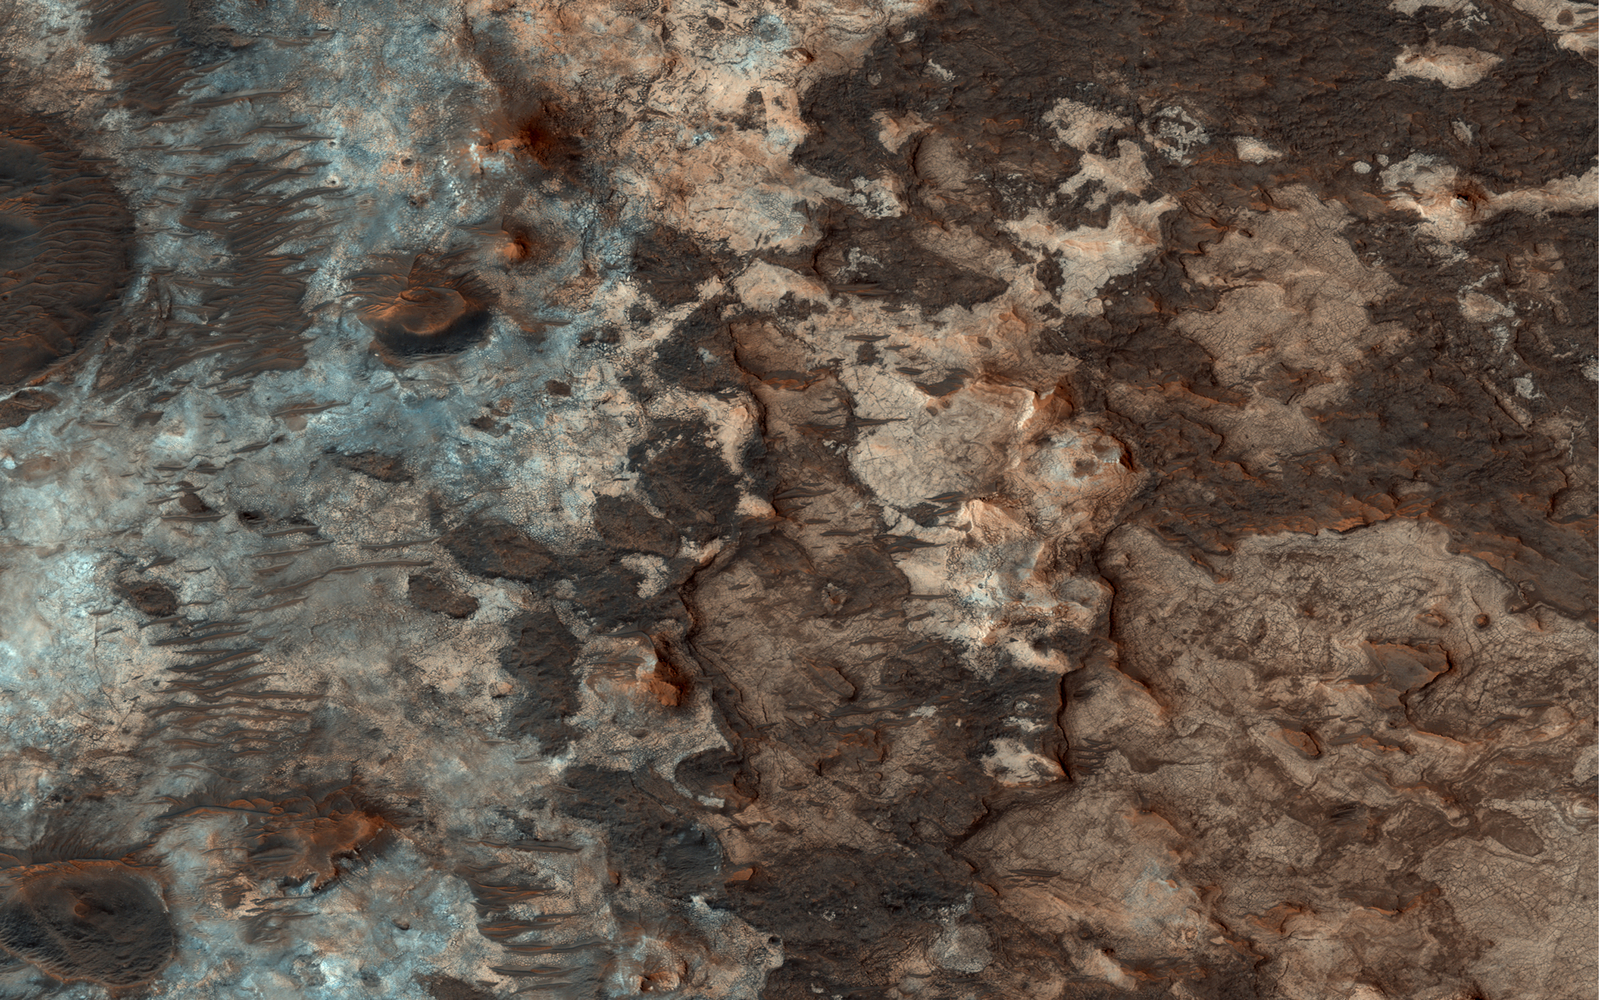 Mawrth Vallis has a rich mineral diversity, including clay minerals that formed by the chemical alteration of rocks or loose "regolith" (soil) by water.